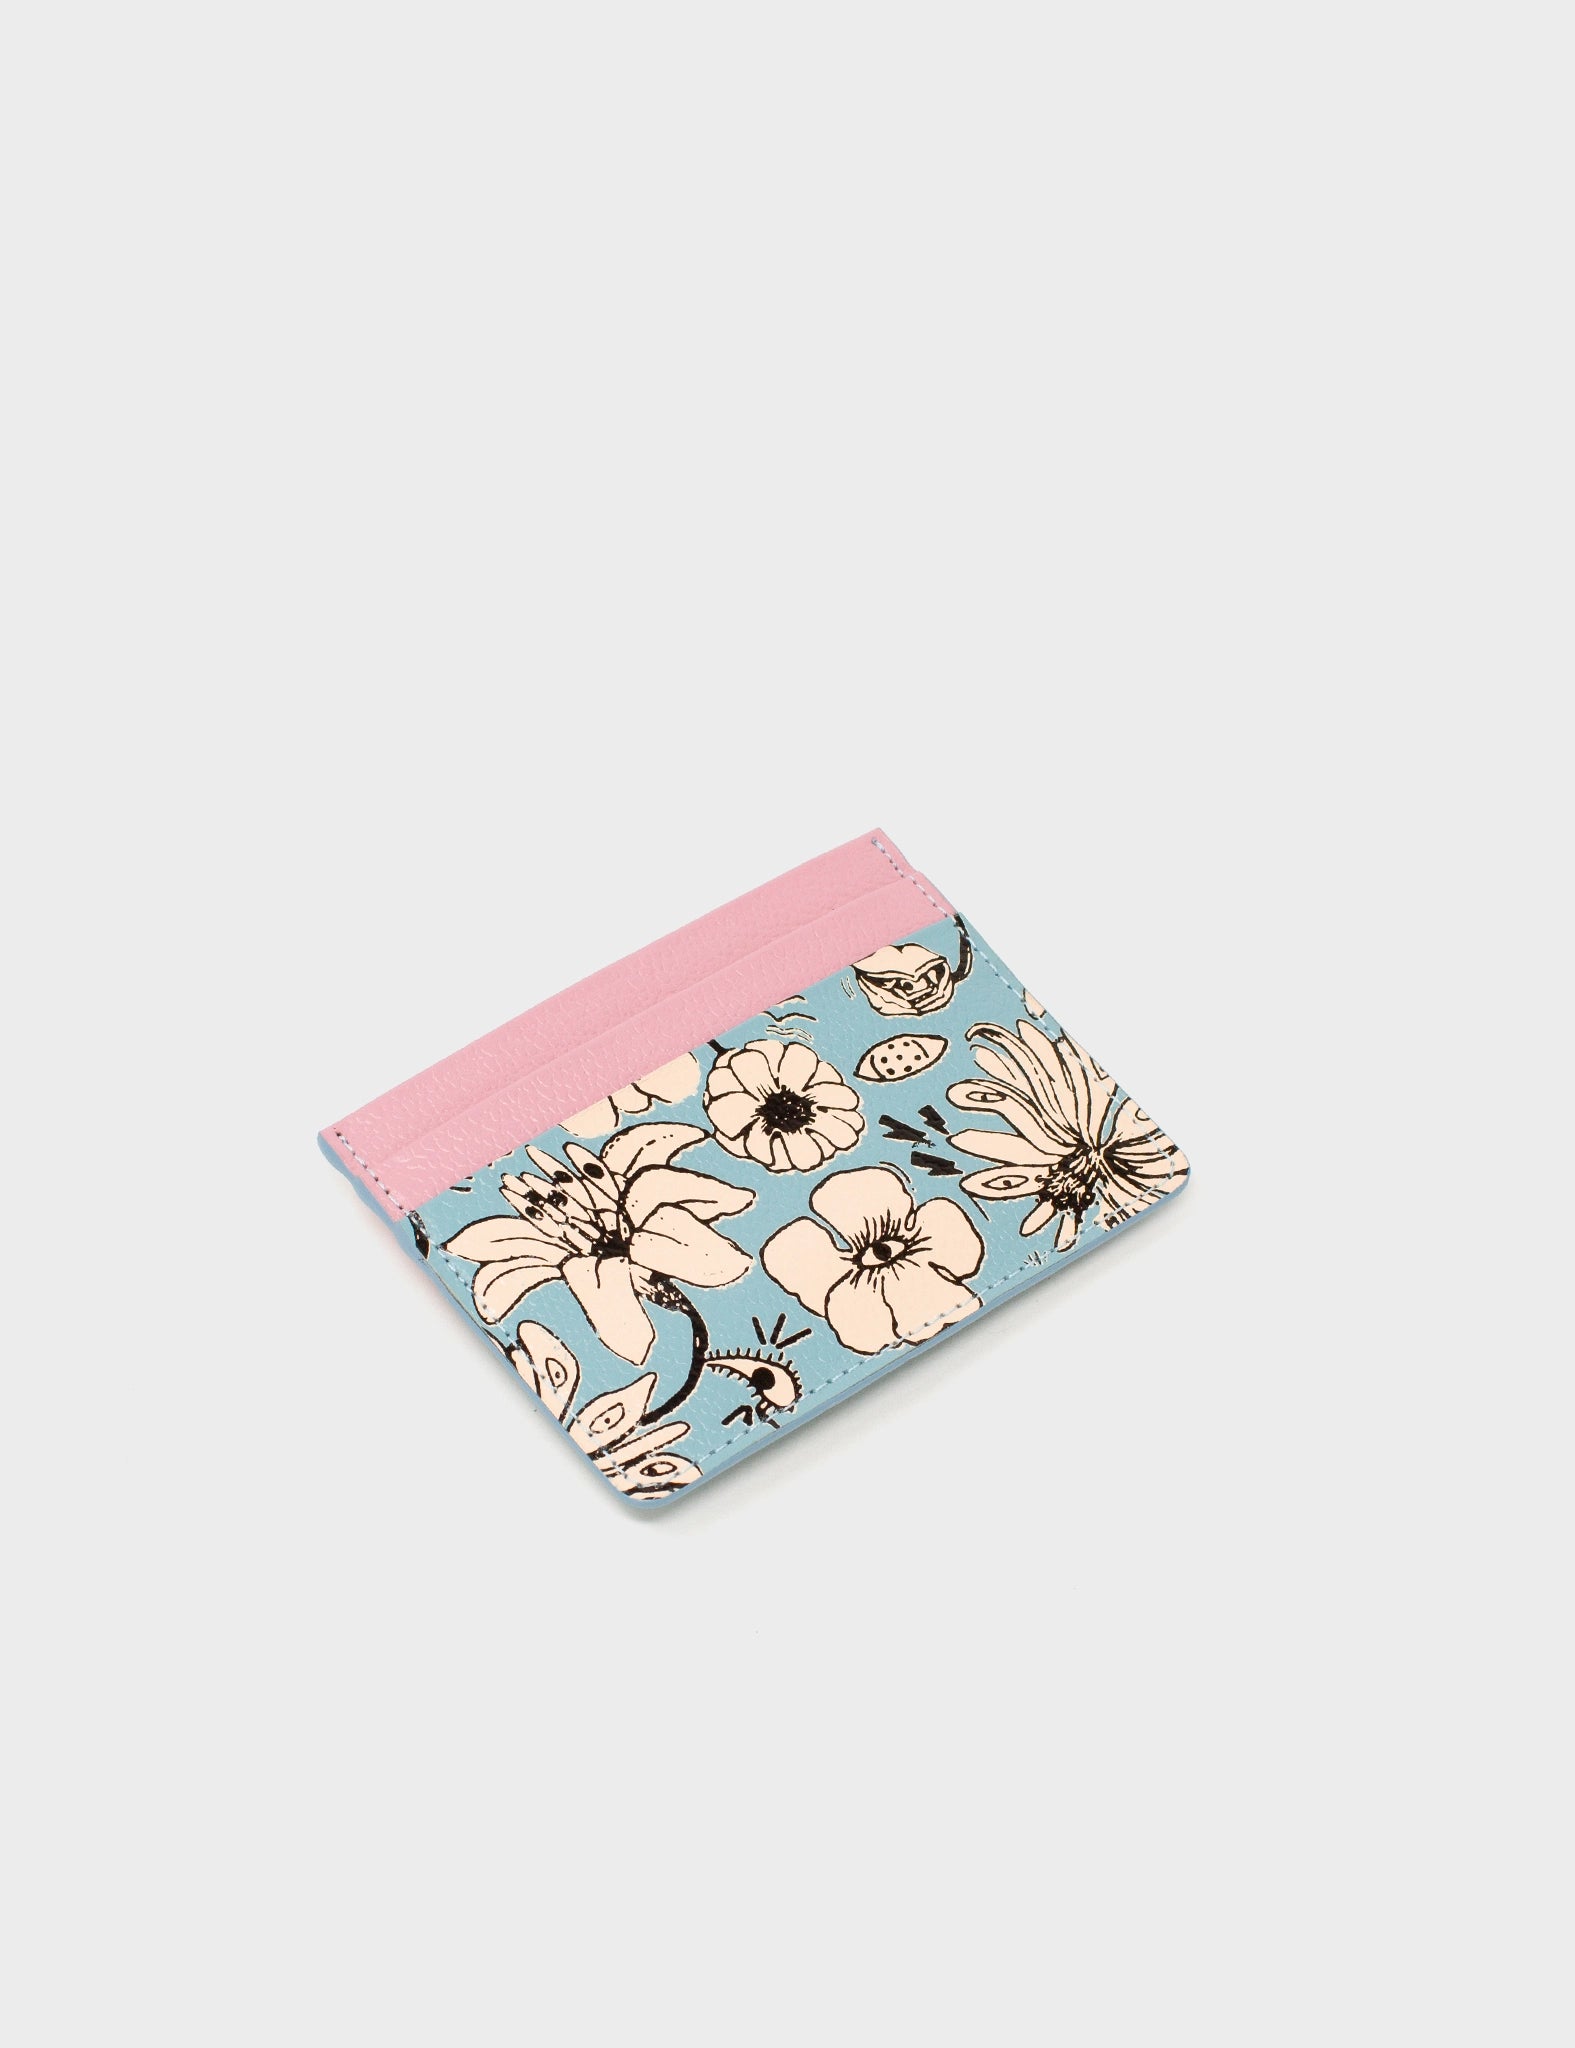 Cameo Blue And Blush Pink Leather Cardholder - Floral Print - Side 